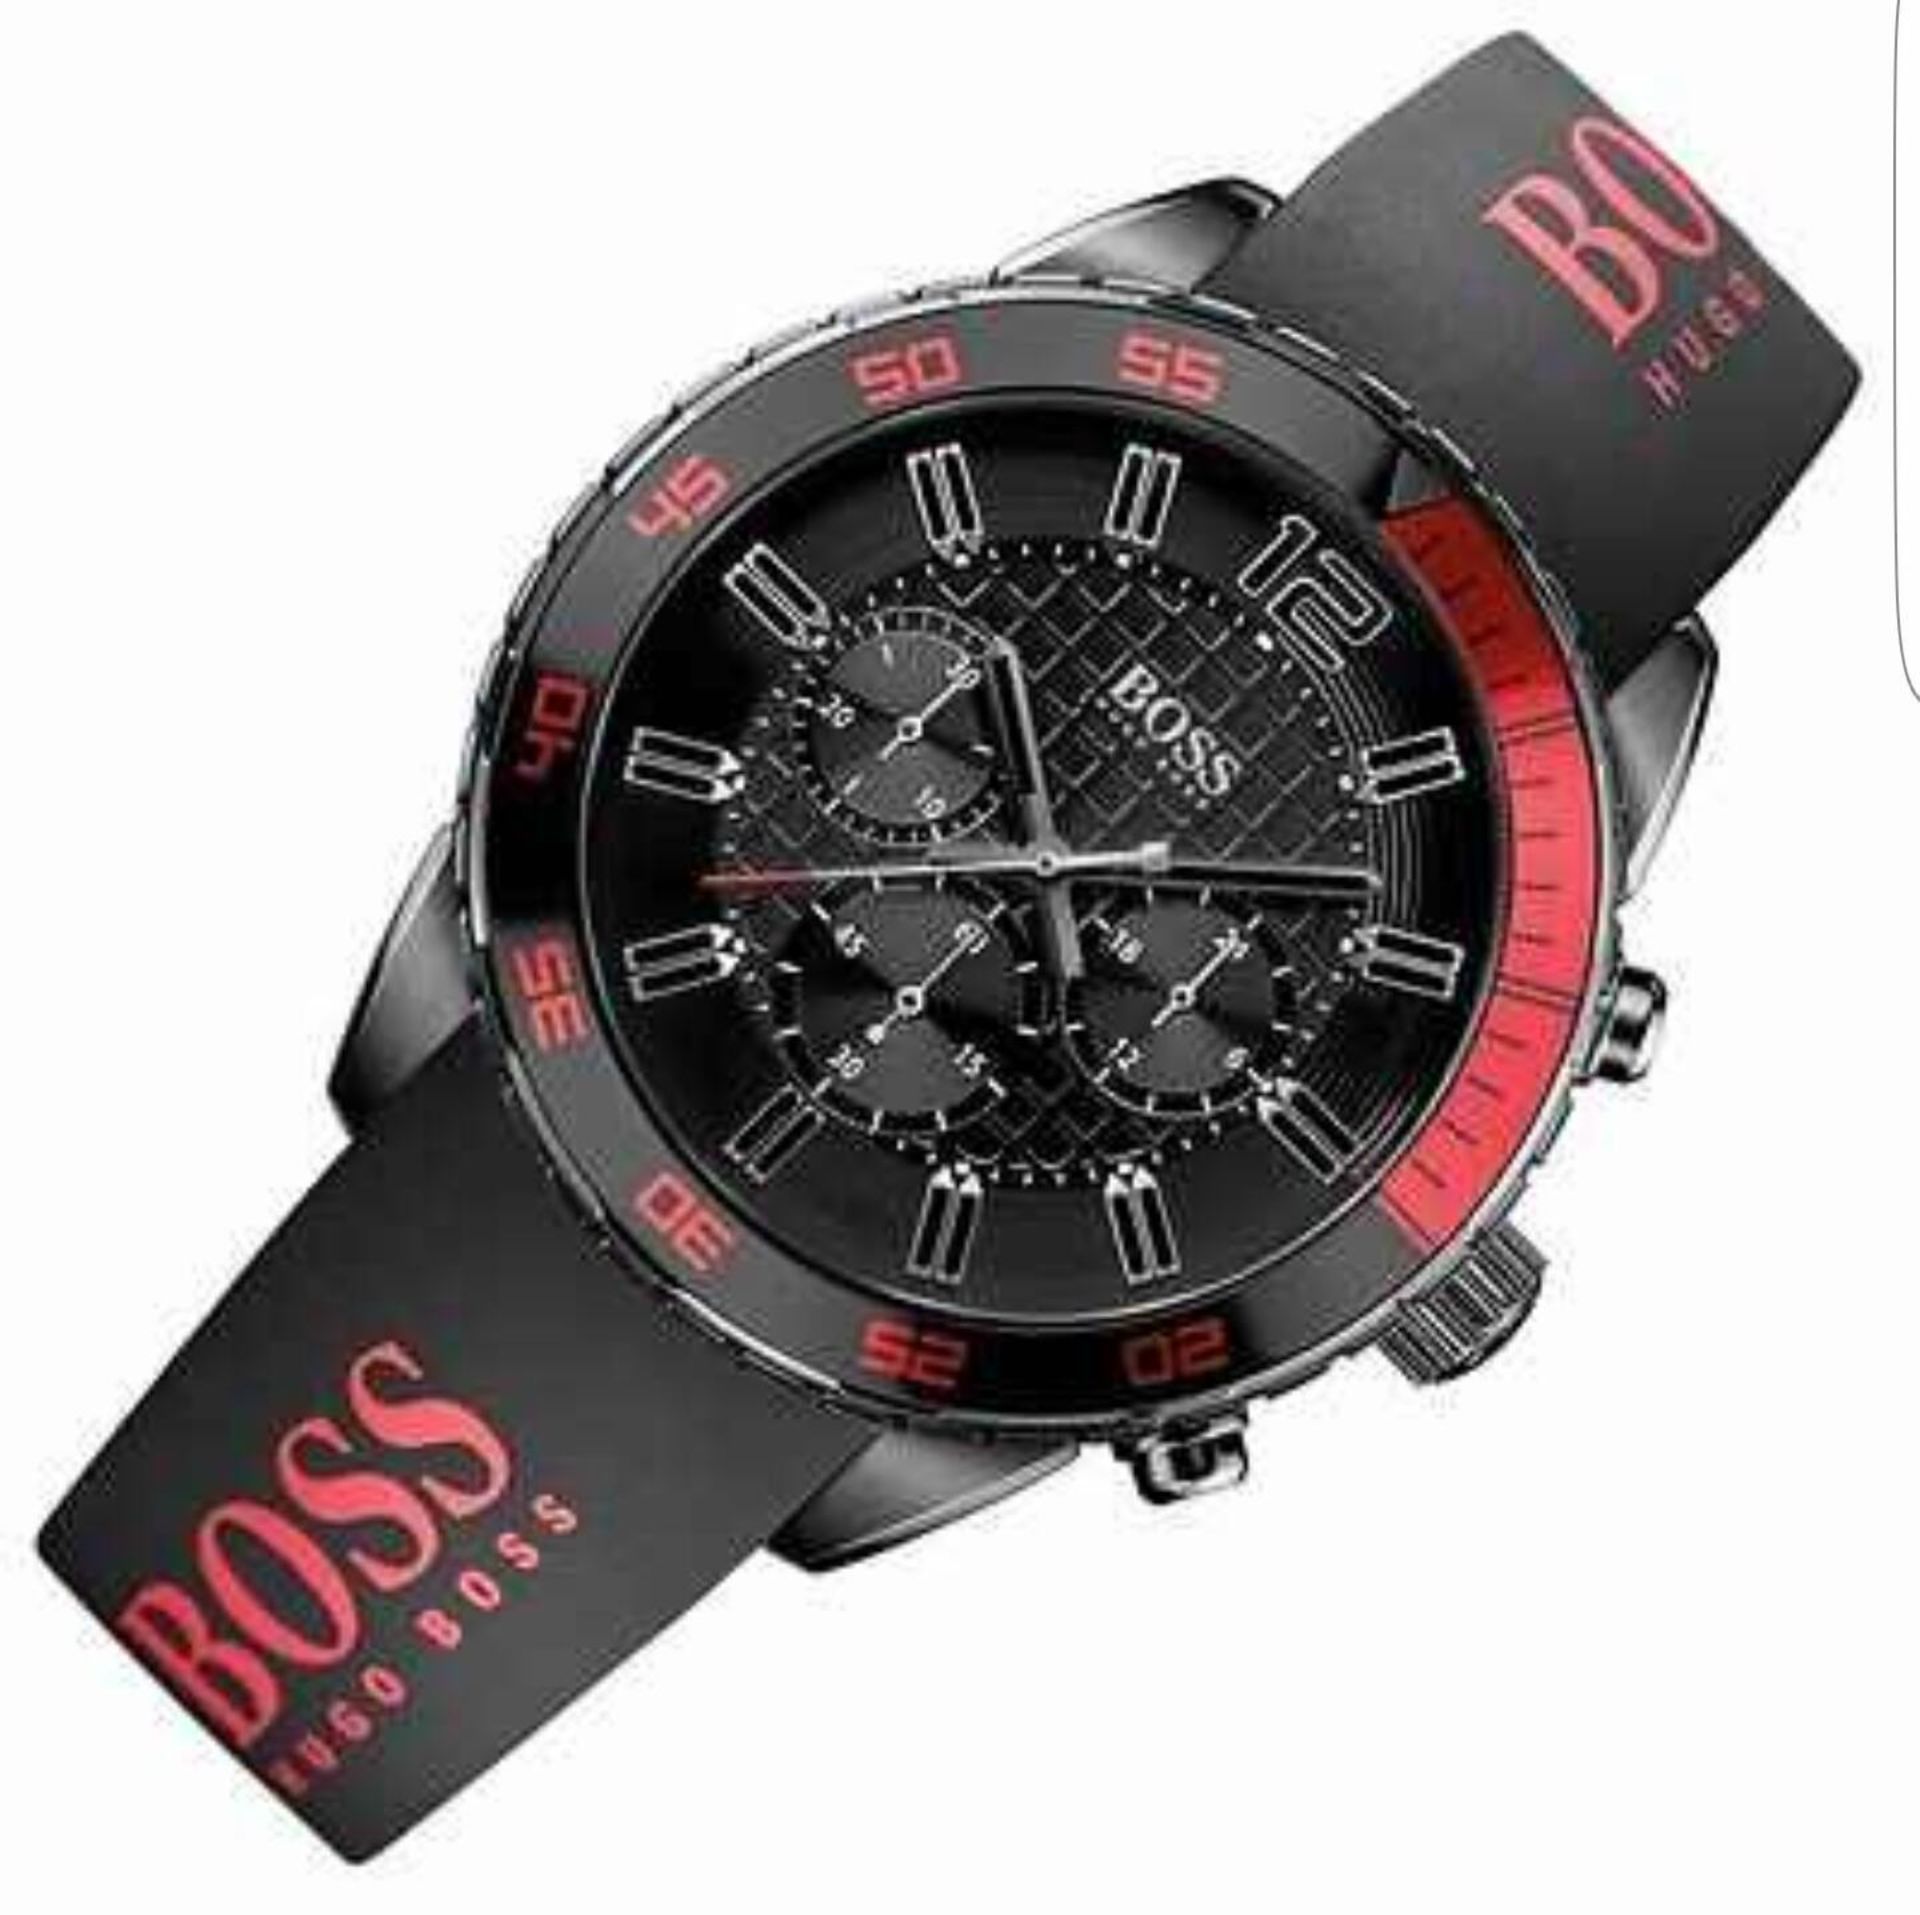 BRAND NEW HUGO BOSS 1512901, GENTS DESIGNER CHRONOGRAPH WATCH WITH ORIGINAL BOX AND BOOKLET - RRP £ - Image 2 of 2